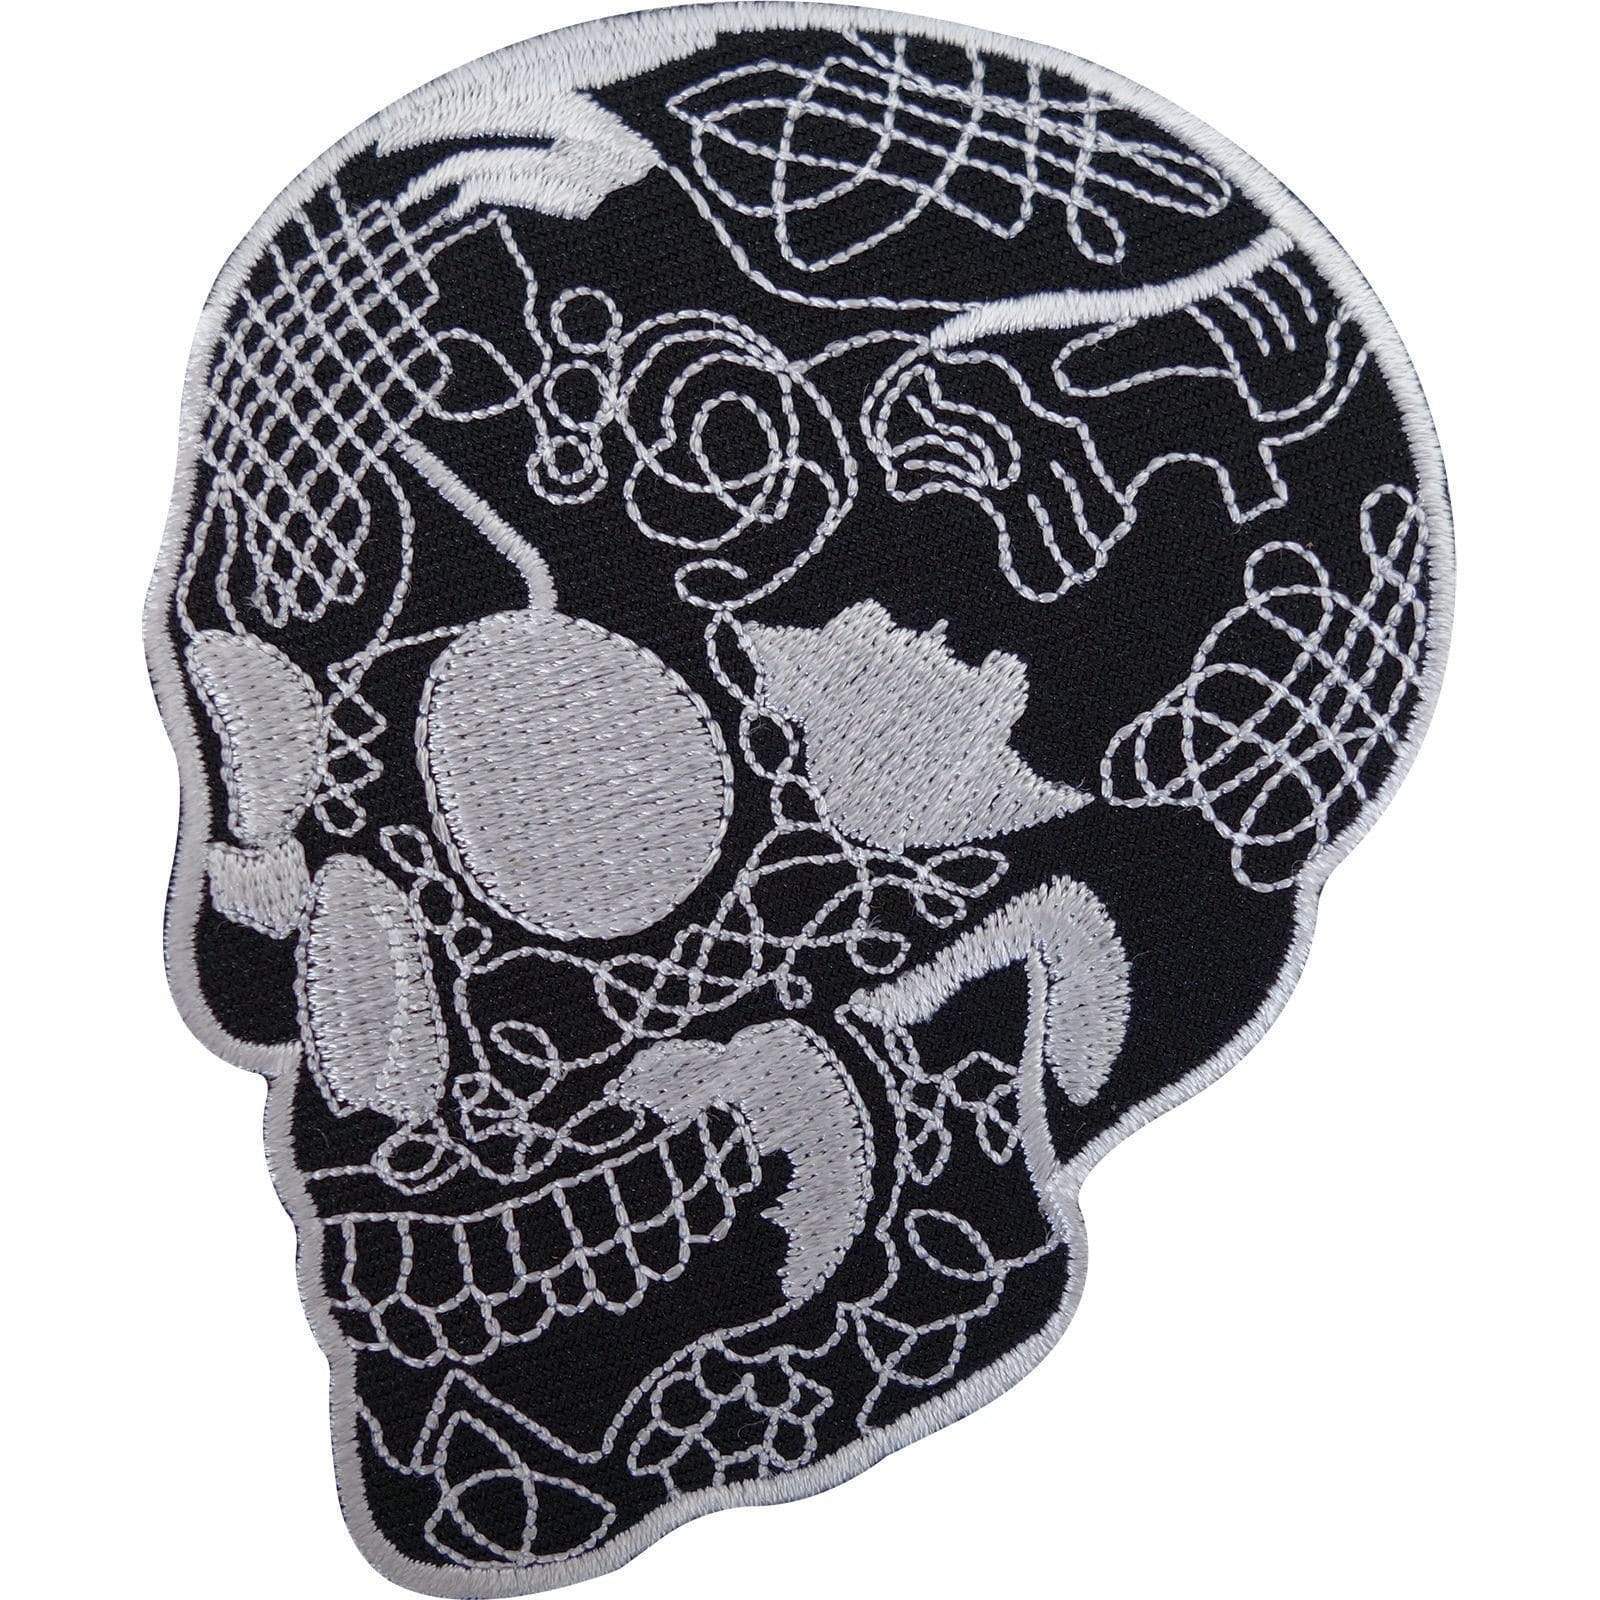 Black Skull Patch Embroidered Iron Sew On Motorcycle Jacket Bag Rockabilly Badge